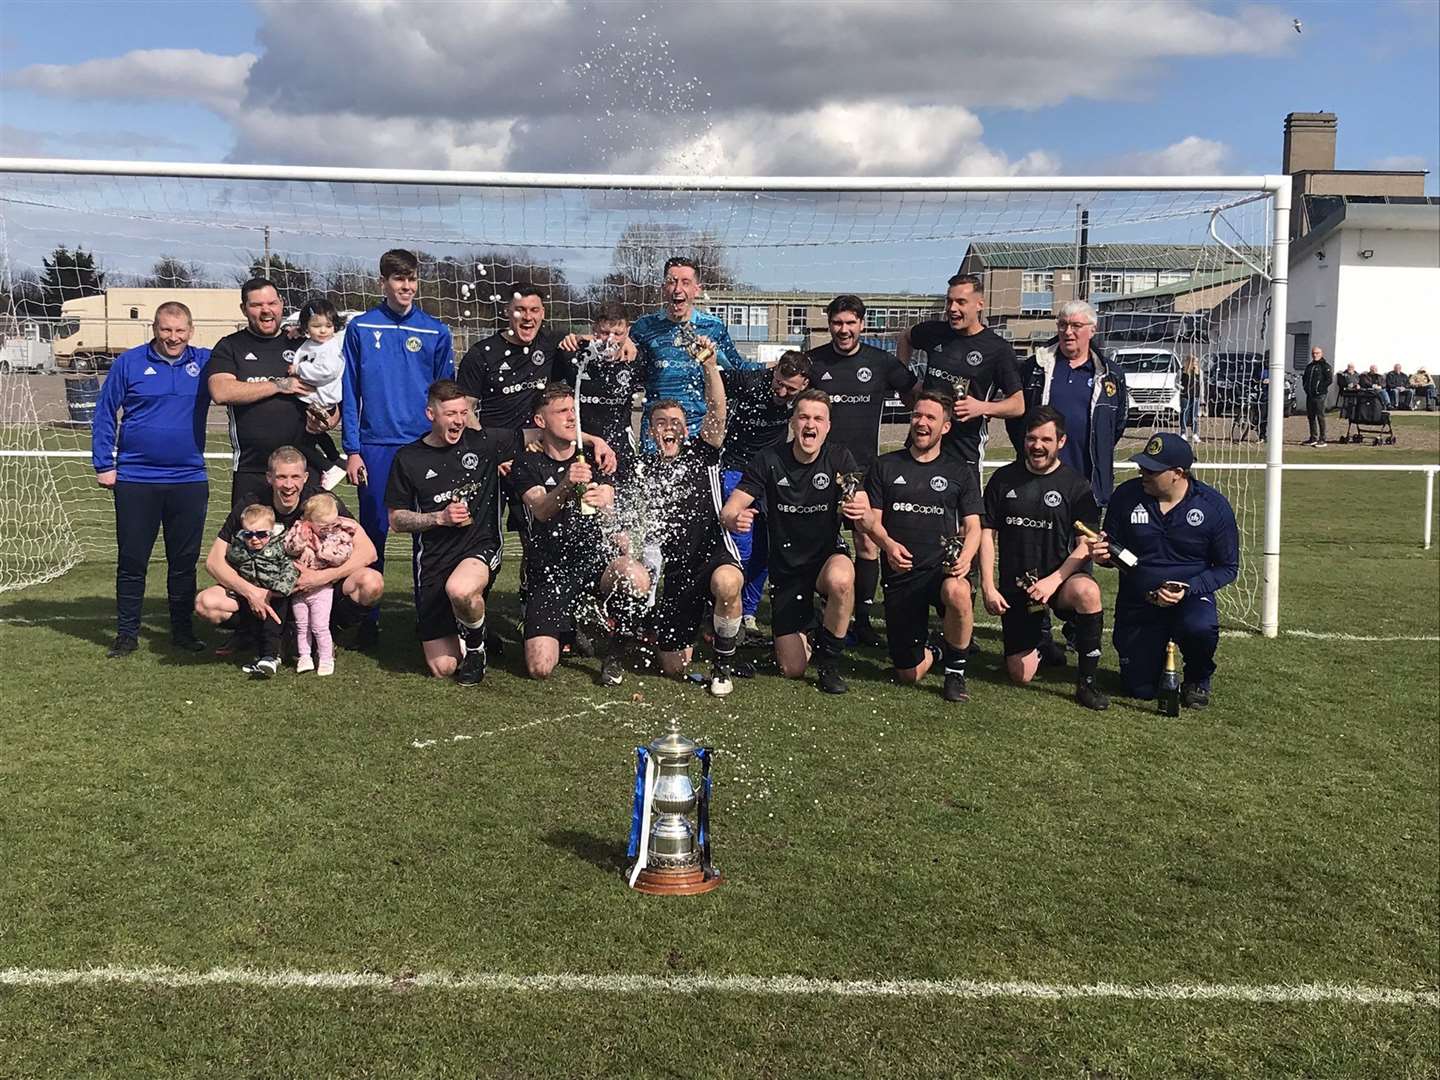 Invergordon beat Orkney 1-0 to claim the title.